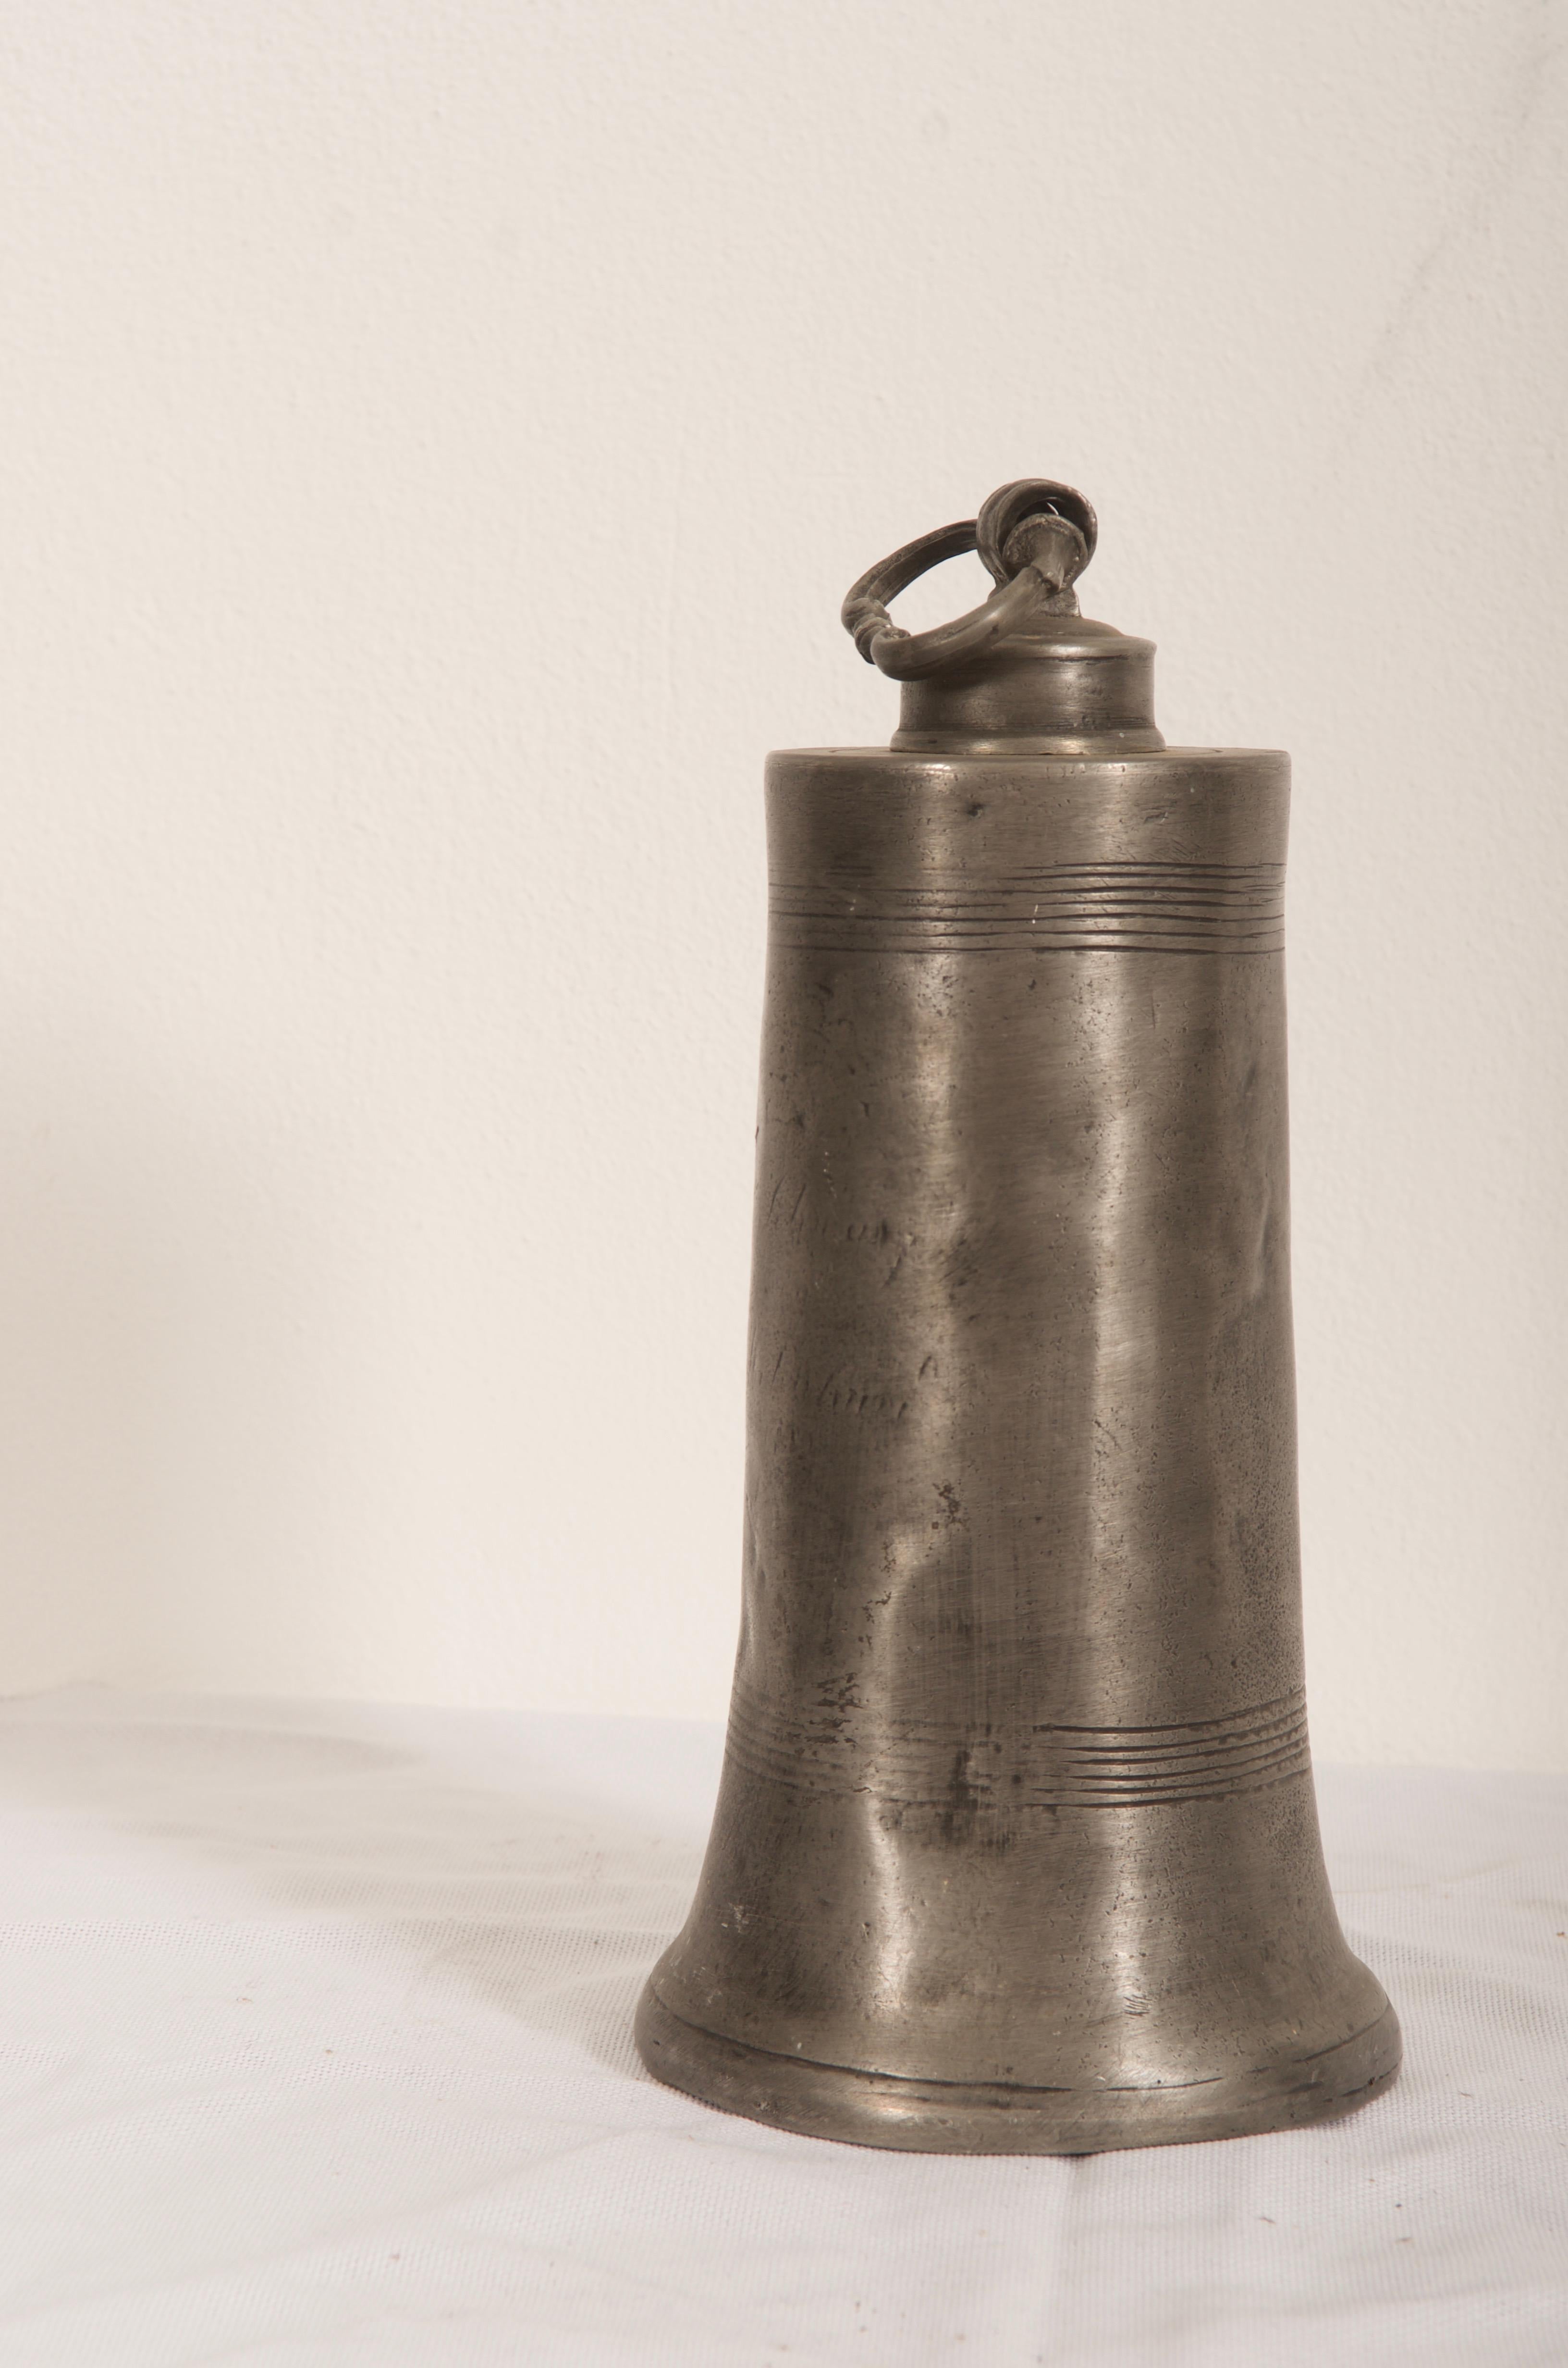 Tin bottle with screw lid made in Germany, second half of the 1700.